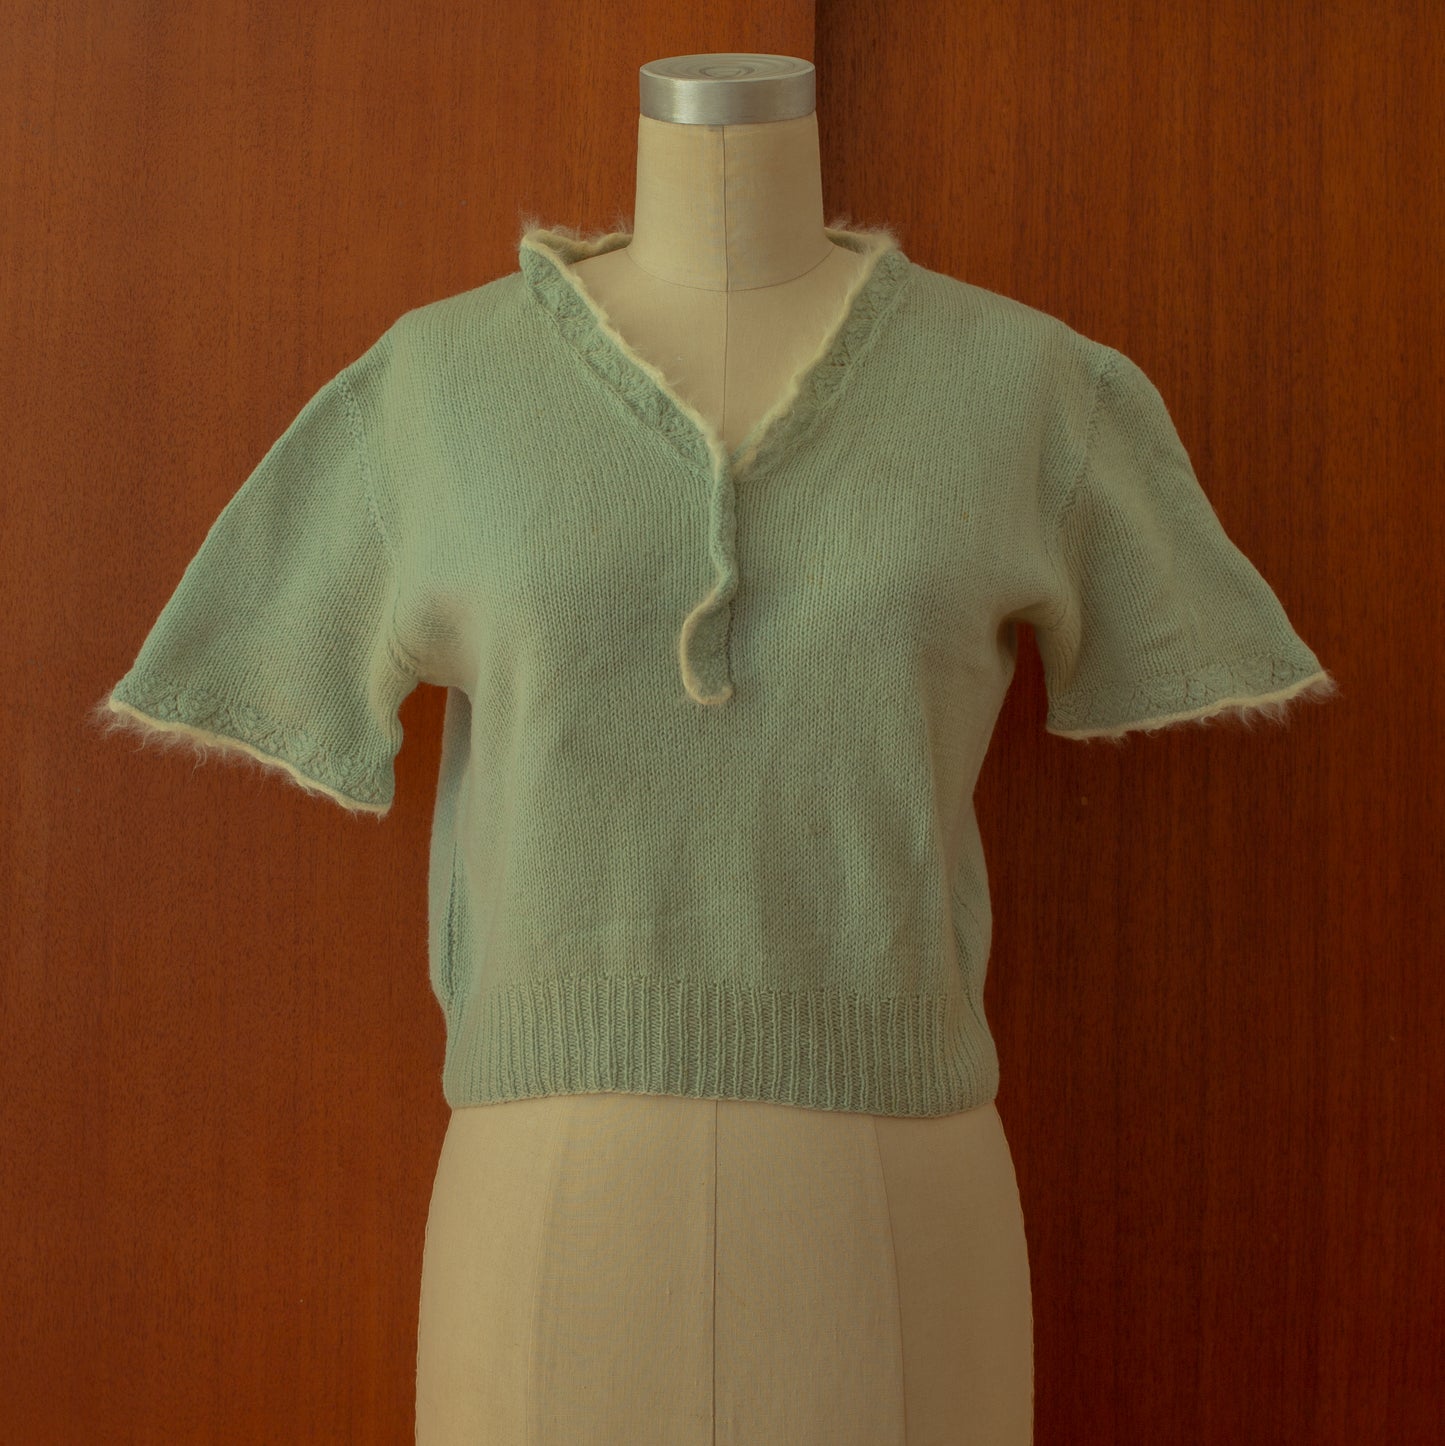 Vintage 1930s 1940s Hand Knit Blue Angora Trimmed Sweater